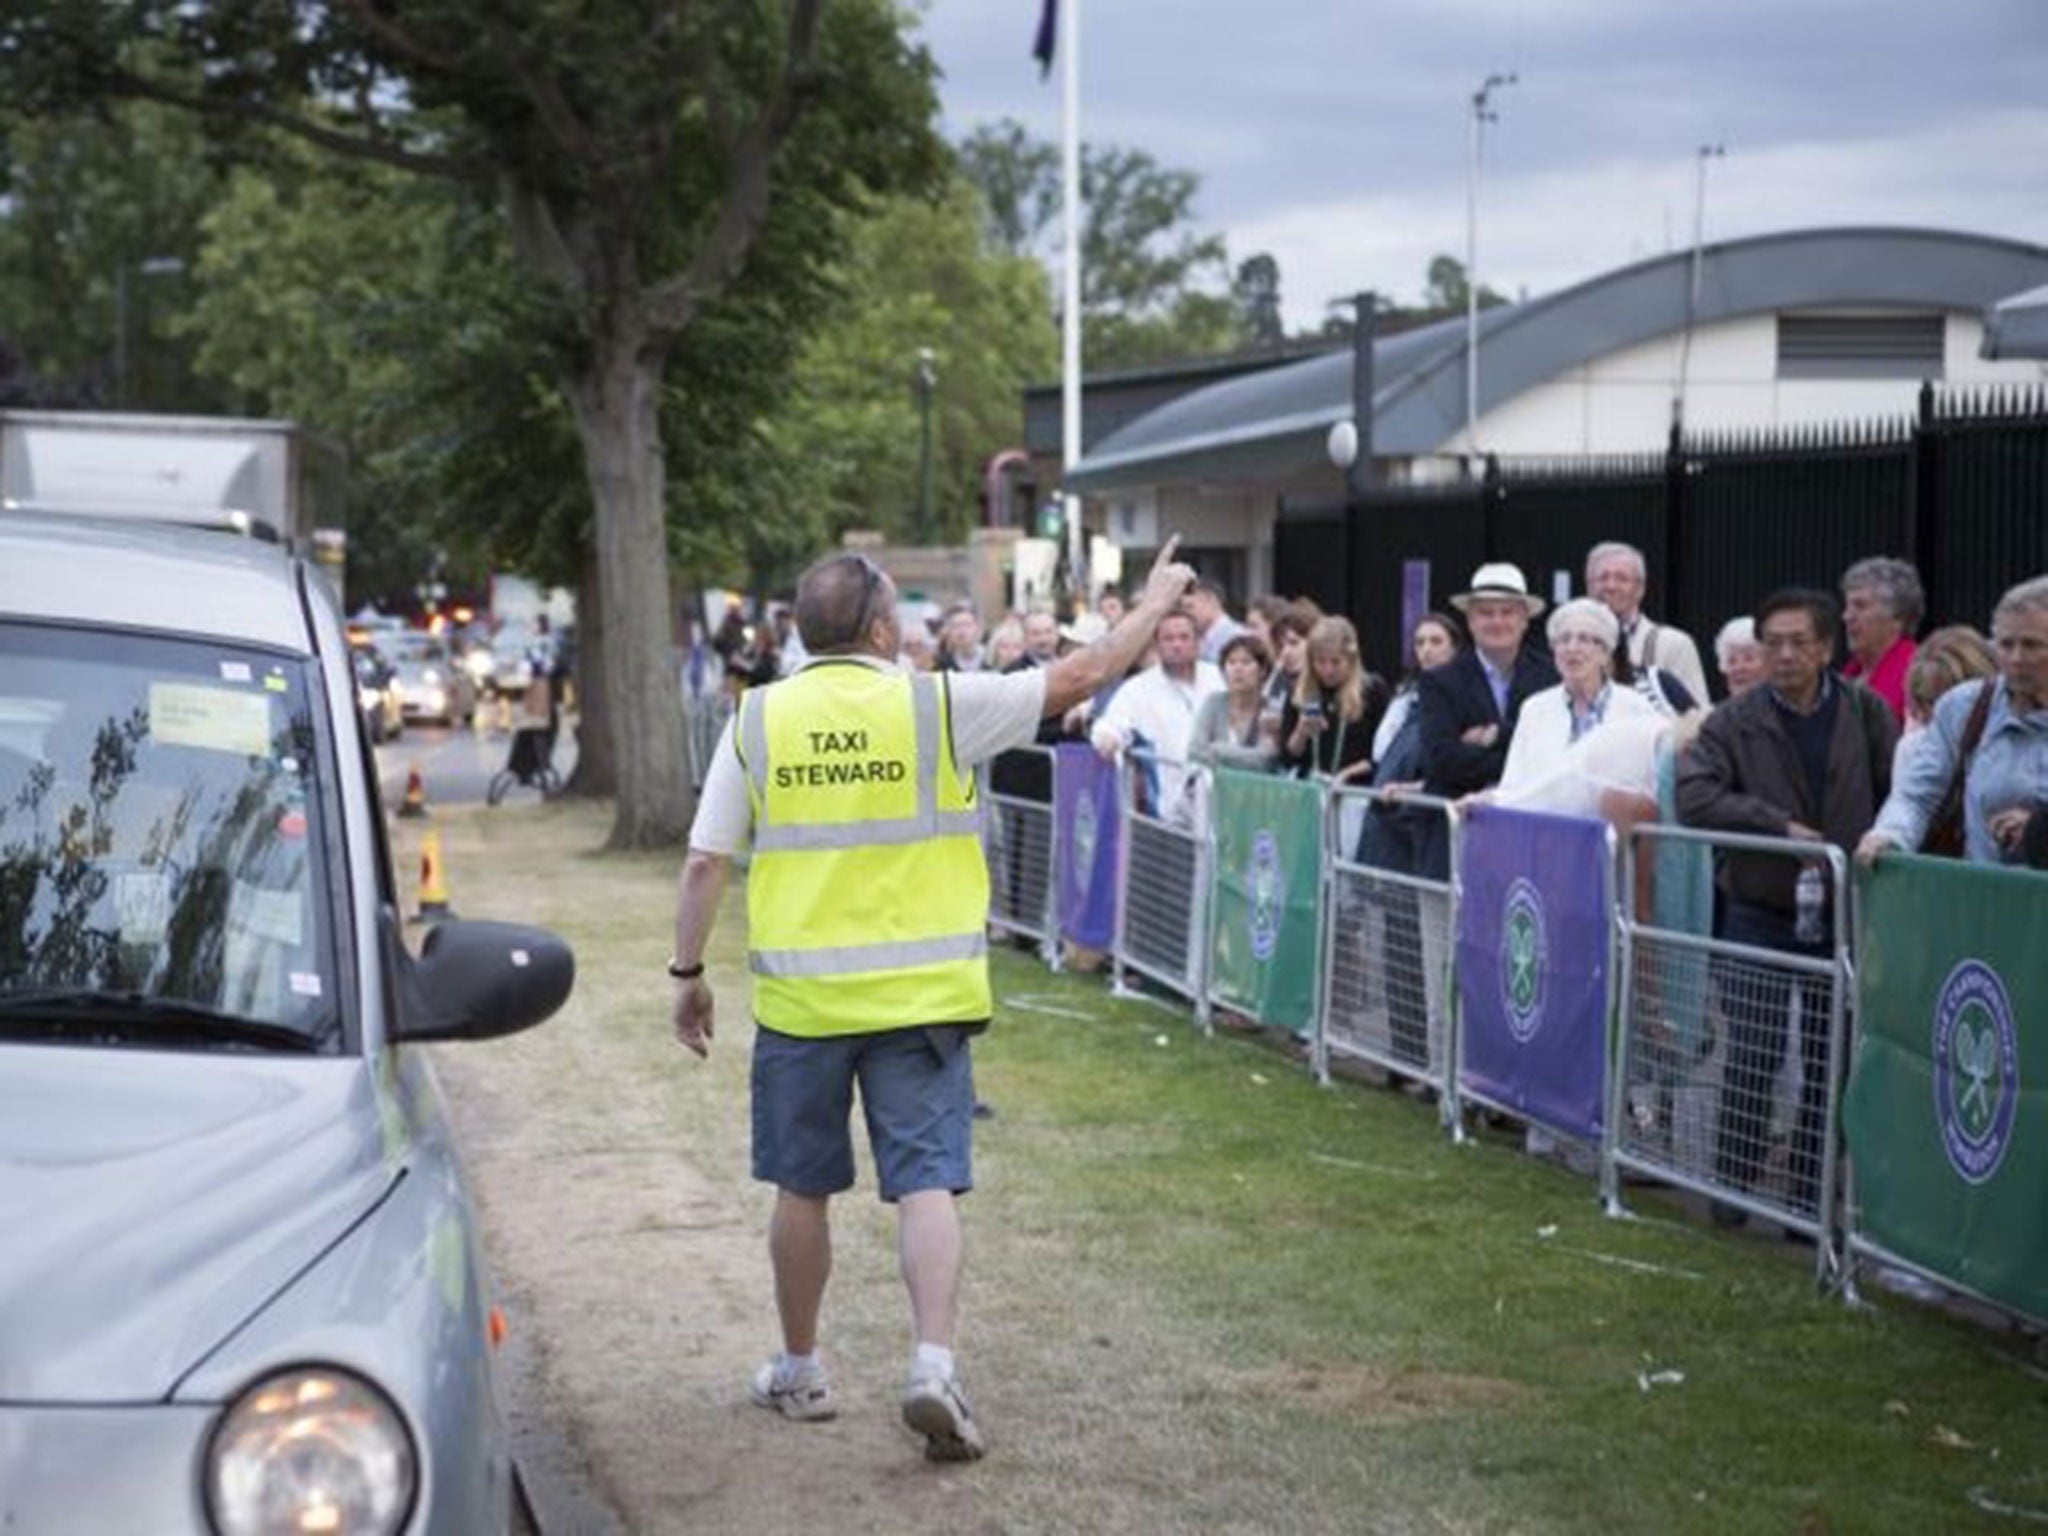 People wait in line for taxis in Wimbledon, south west London, as tennis fans leaving the All England Club faced a difficult journey home due to a Tube strike which will cripple services until Friday morning.